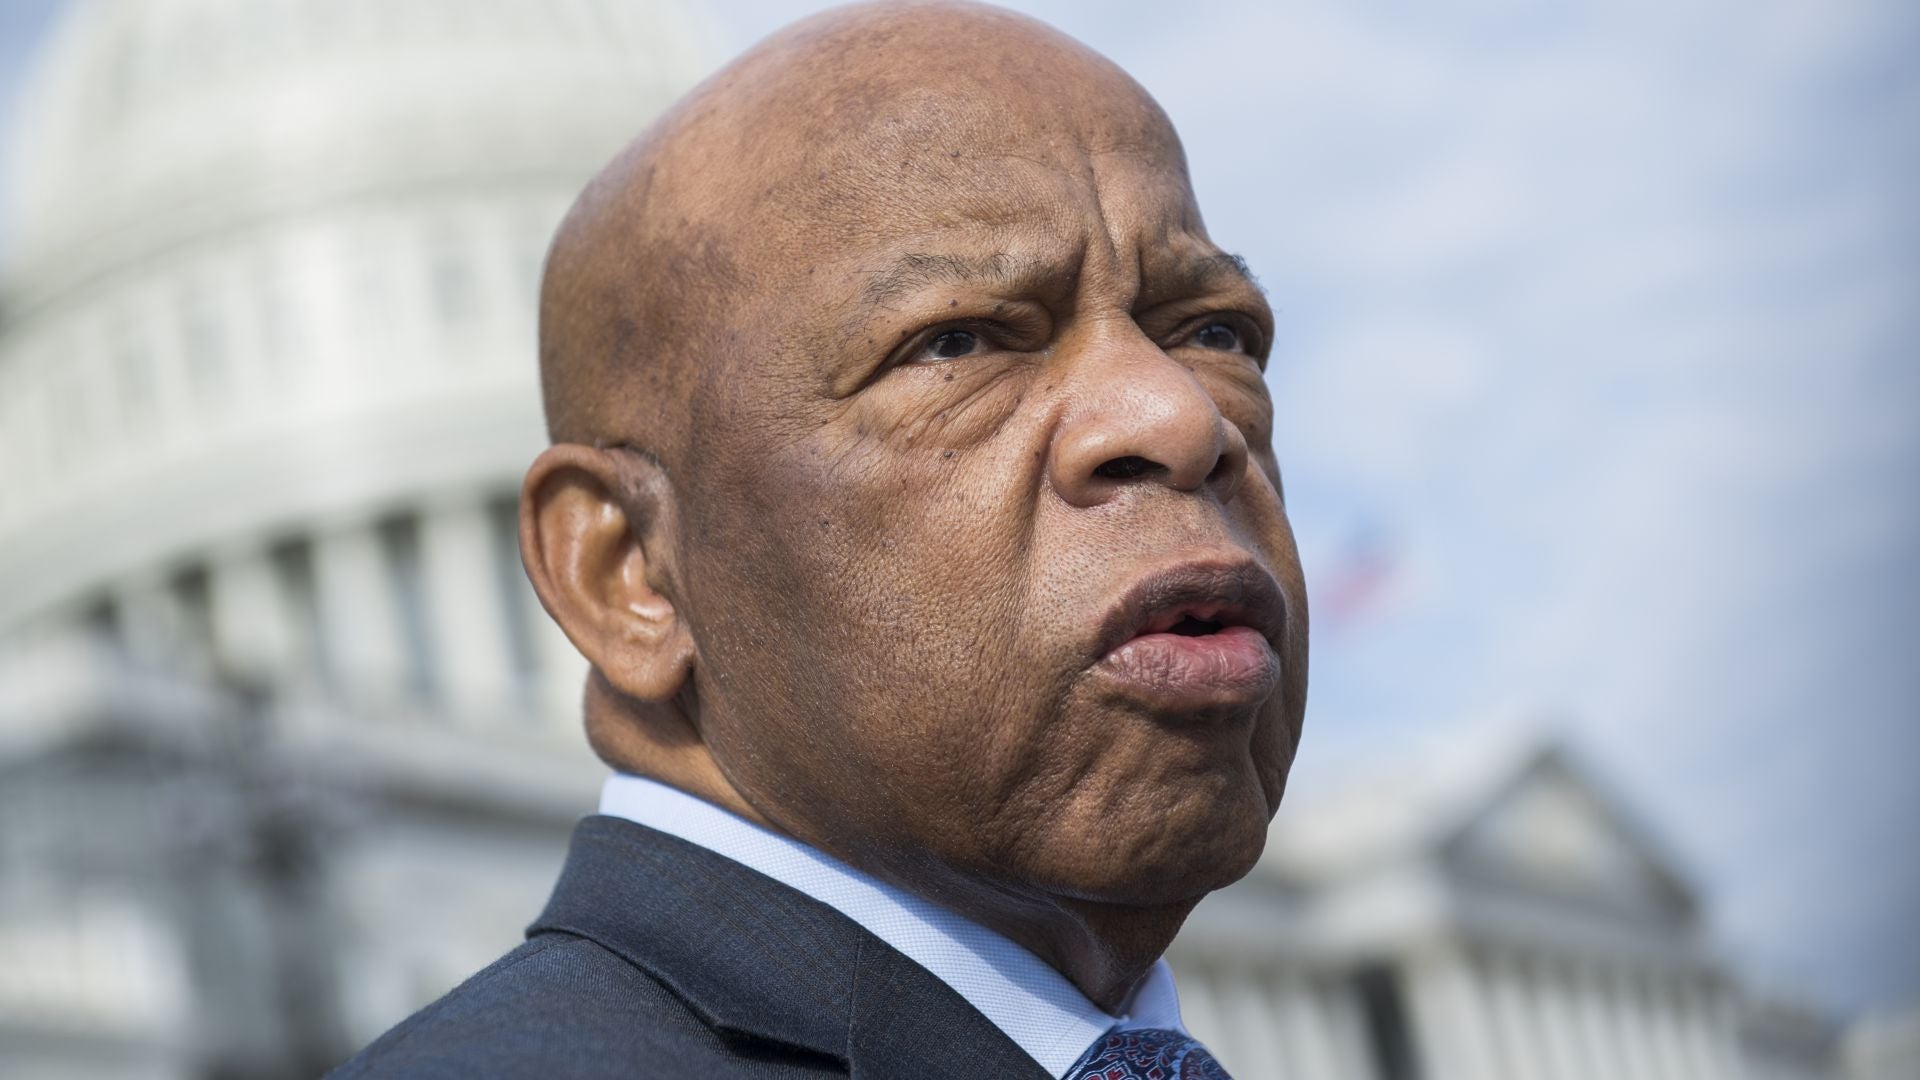 Rep. John Lewis To Lie In State At U.S. Capitol